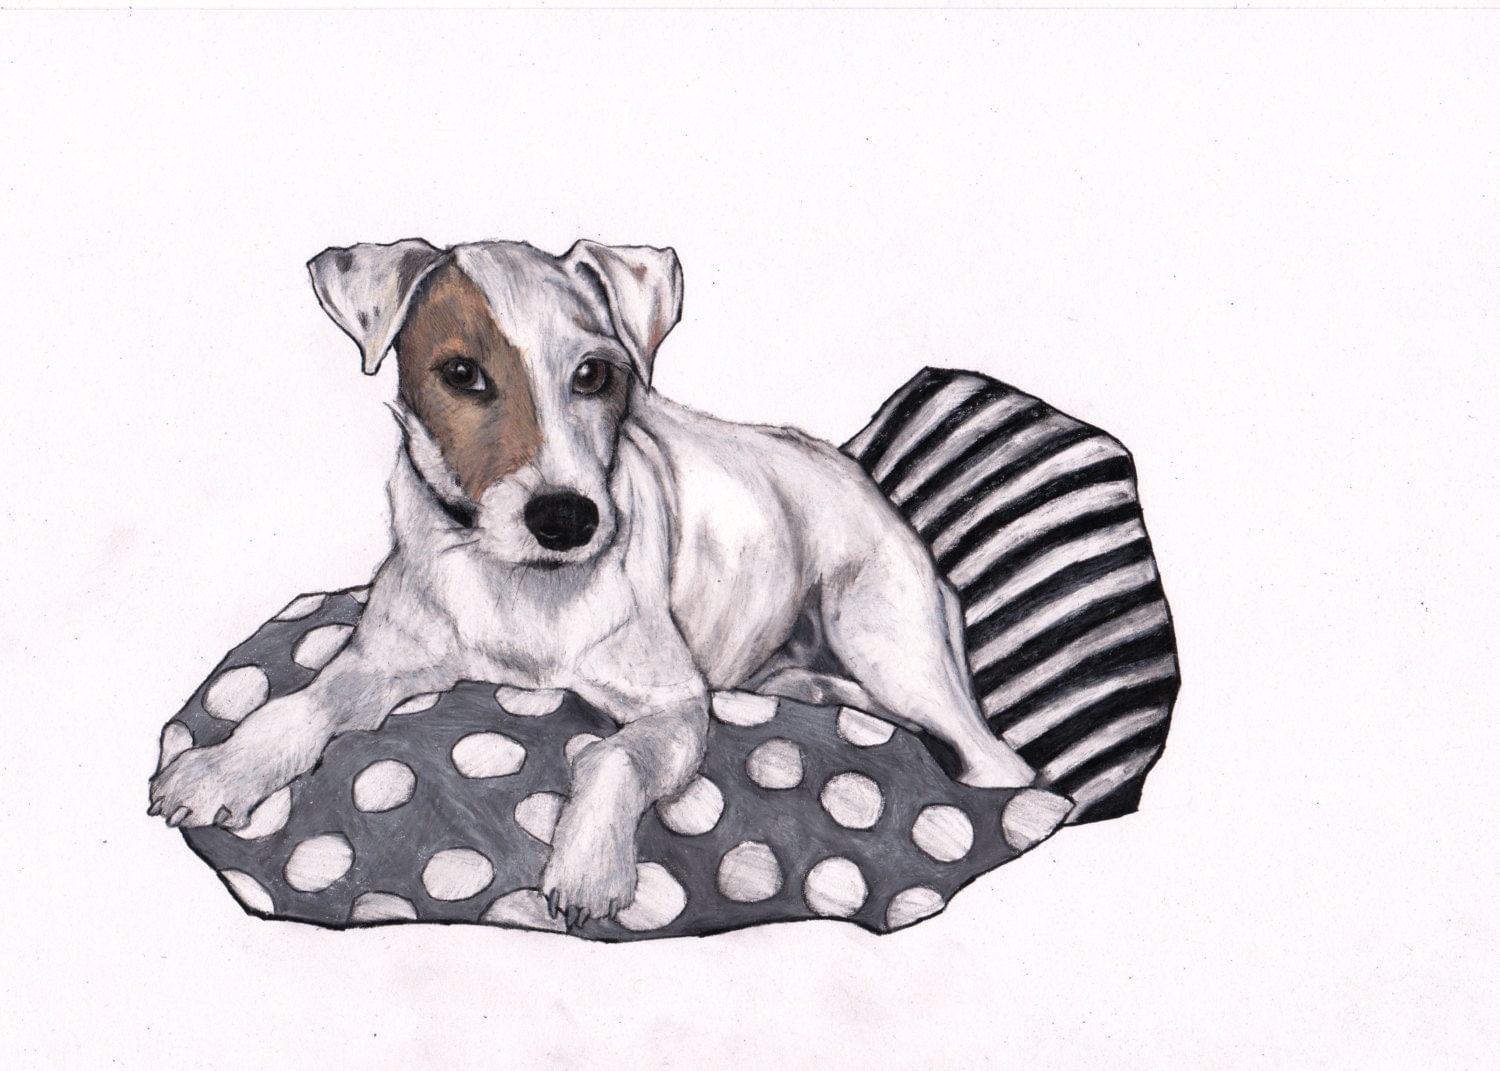 Jack Russell art custom drawing commission a by JimGriffithsArt